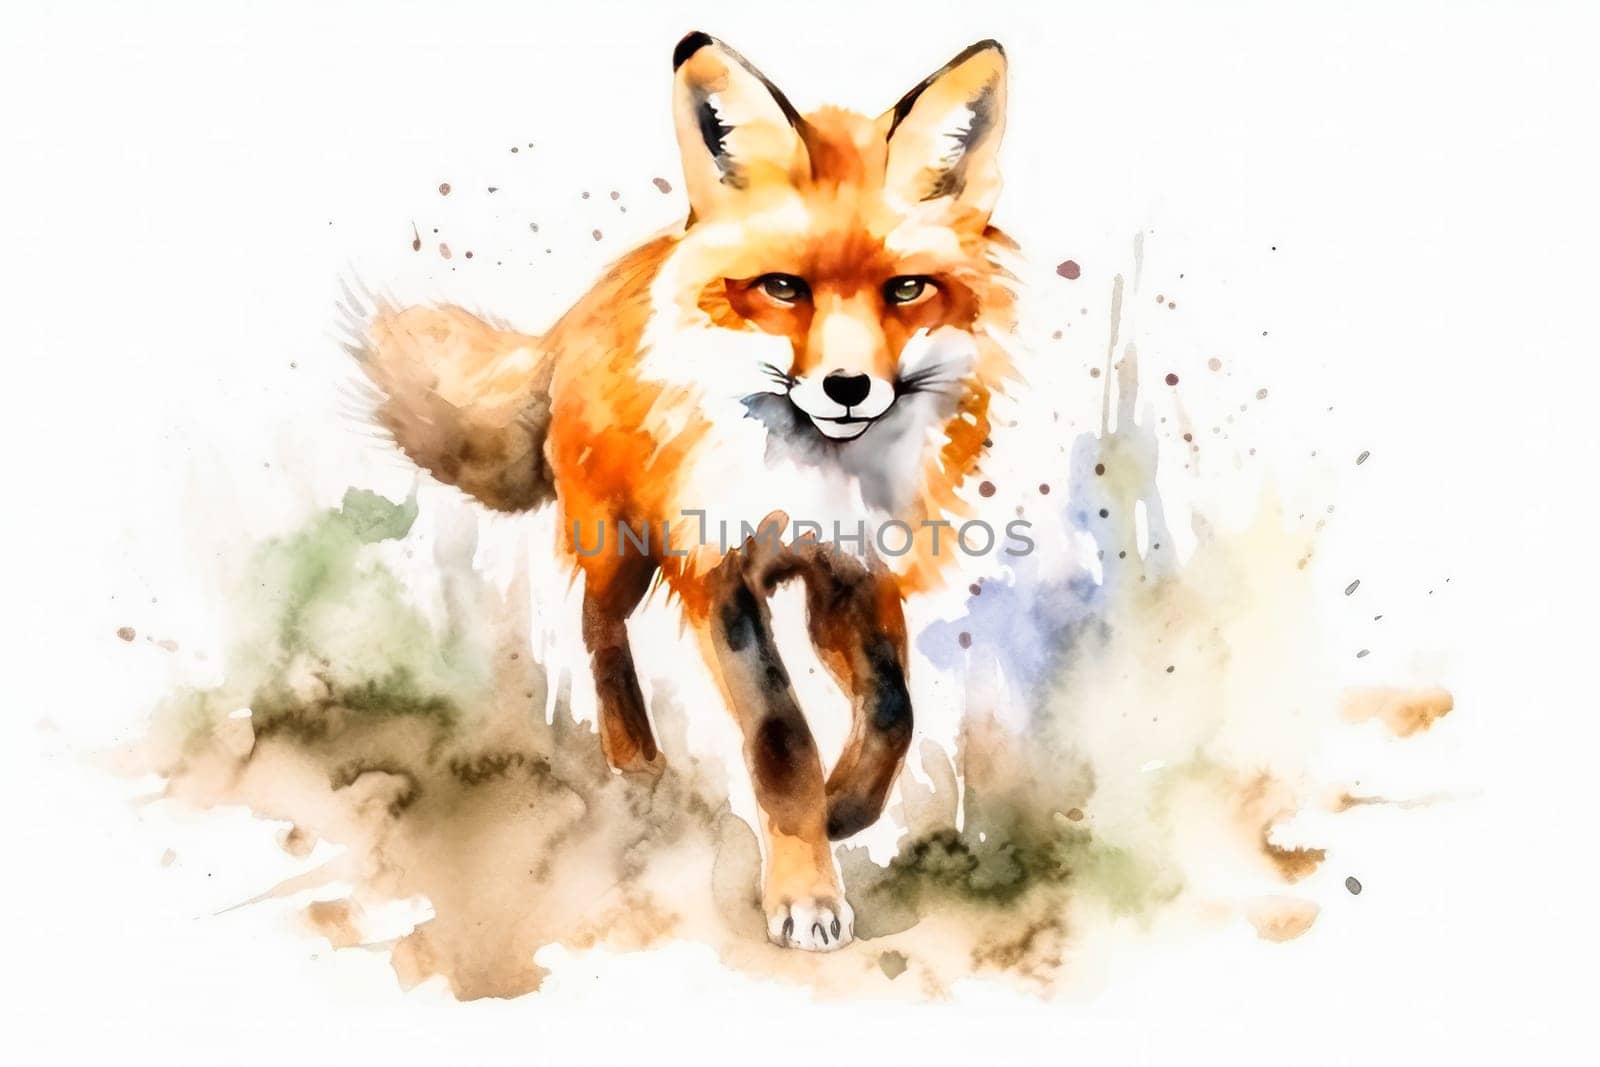 Vibrant and charming watercolor rendition of a fox, perfect for adding a touch of wildlife beauty to any artistic or decorative project.